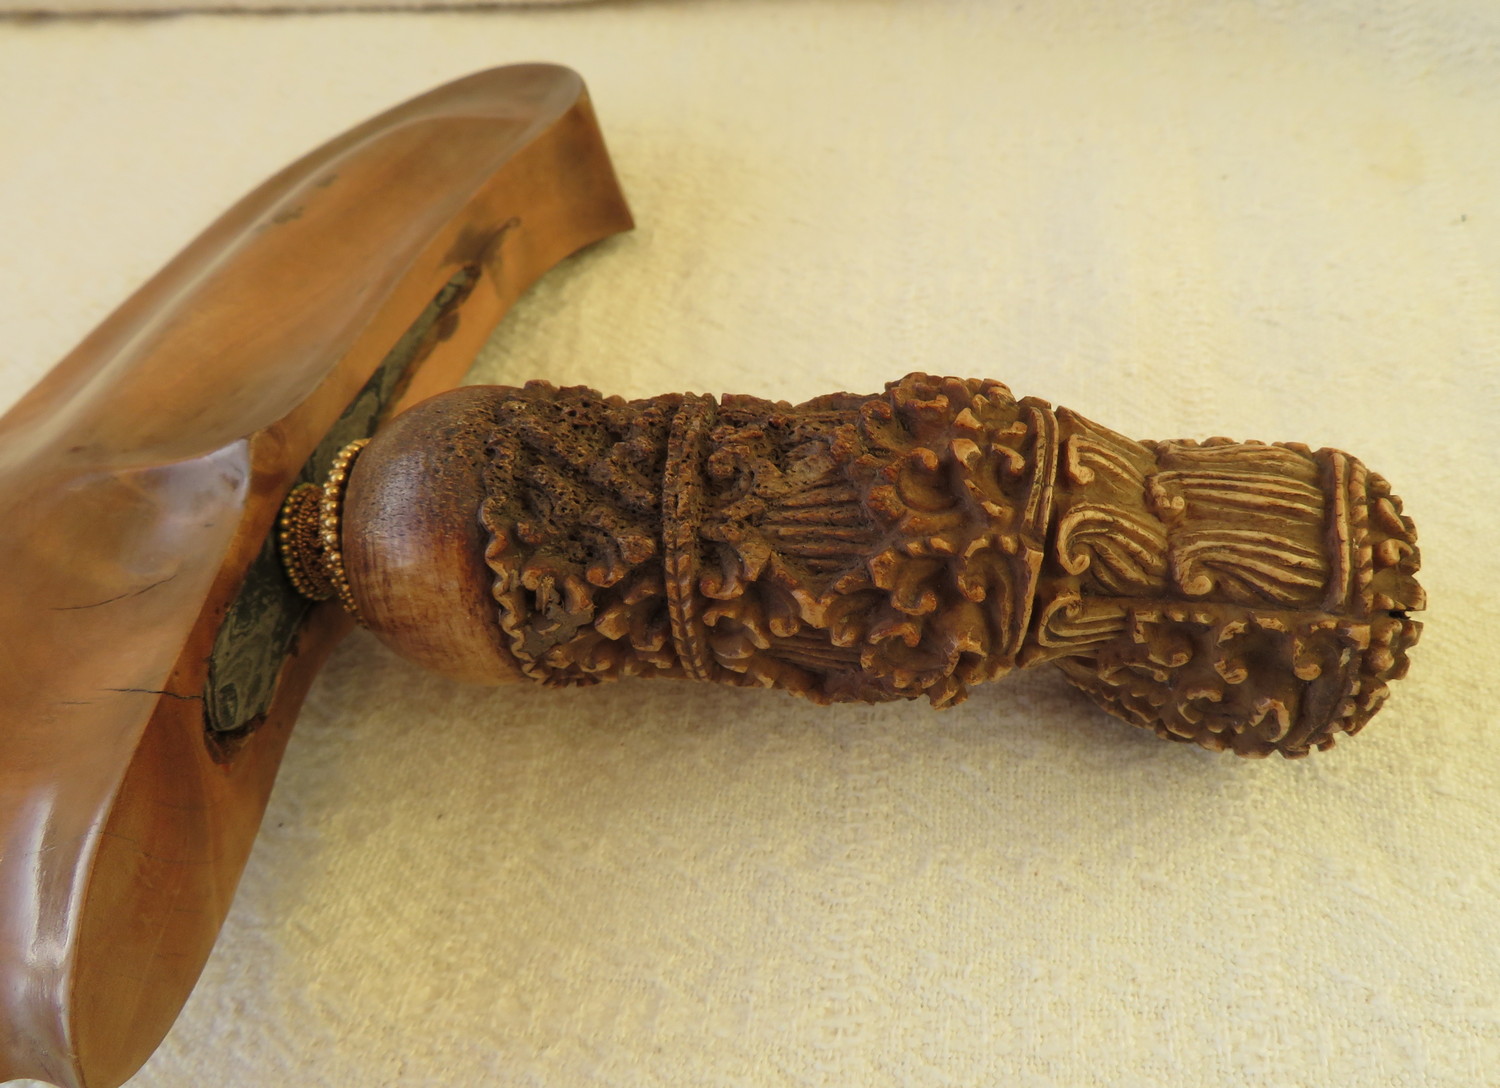 Antique Javanese/Indonesian 19th C Kris with Bone/Ivory?Handle, Gold Metal Ferrule, Brass Scabbard. - Image 5 of 10